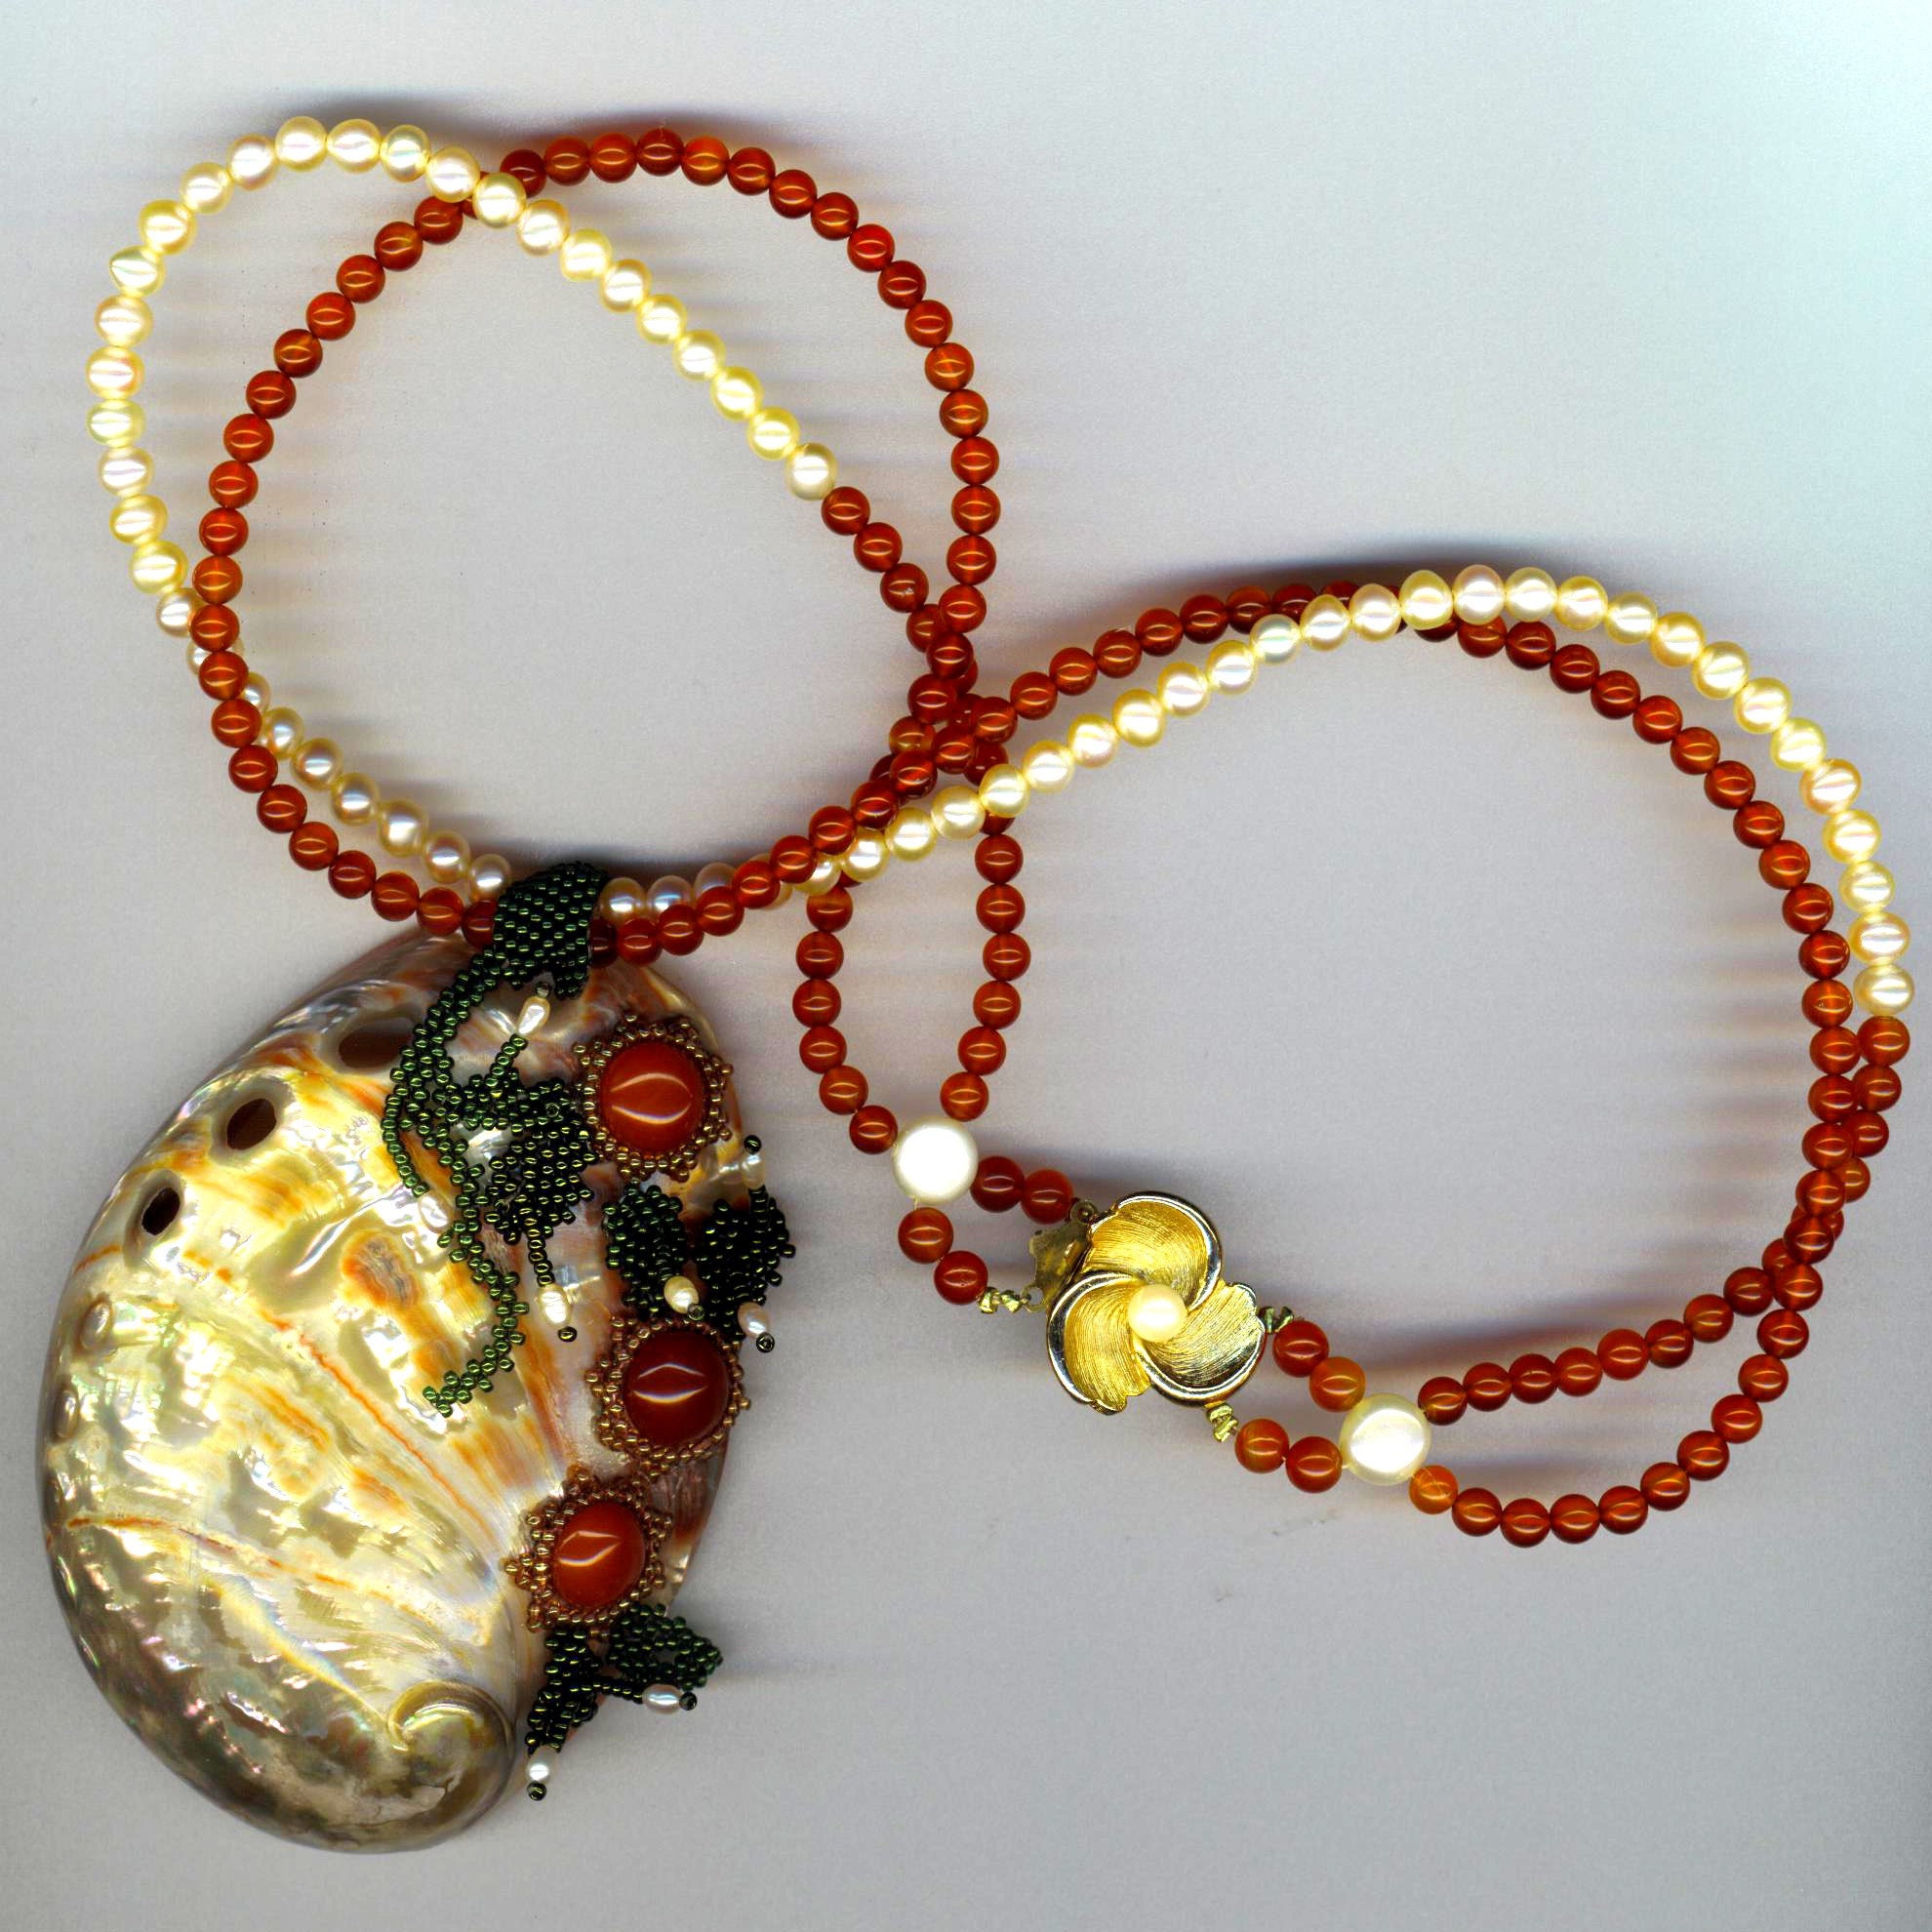 Indian Summer Dream - Pearls and Carnelian Necklace with Shell Pendant